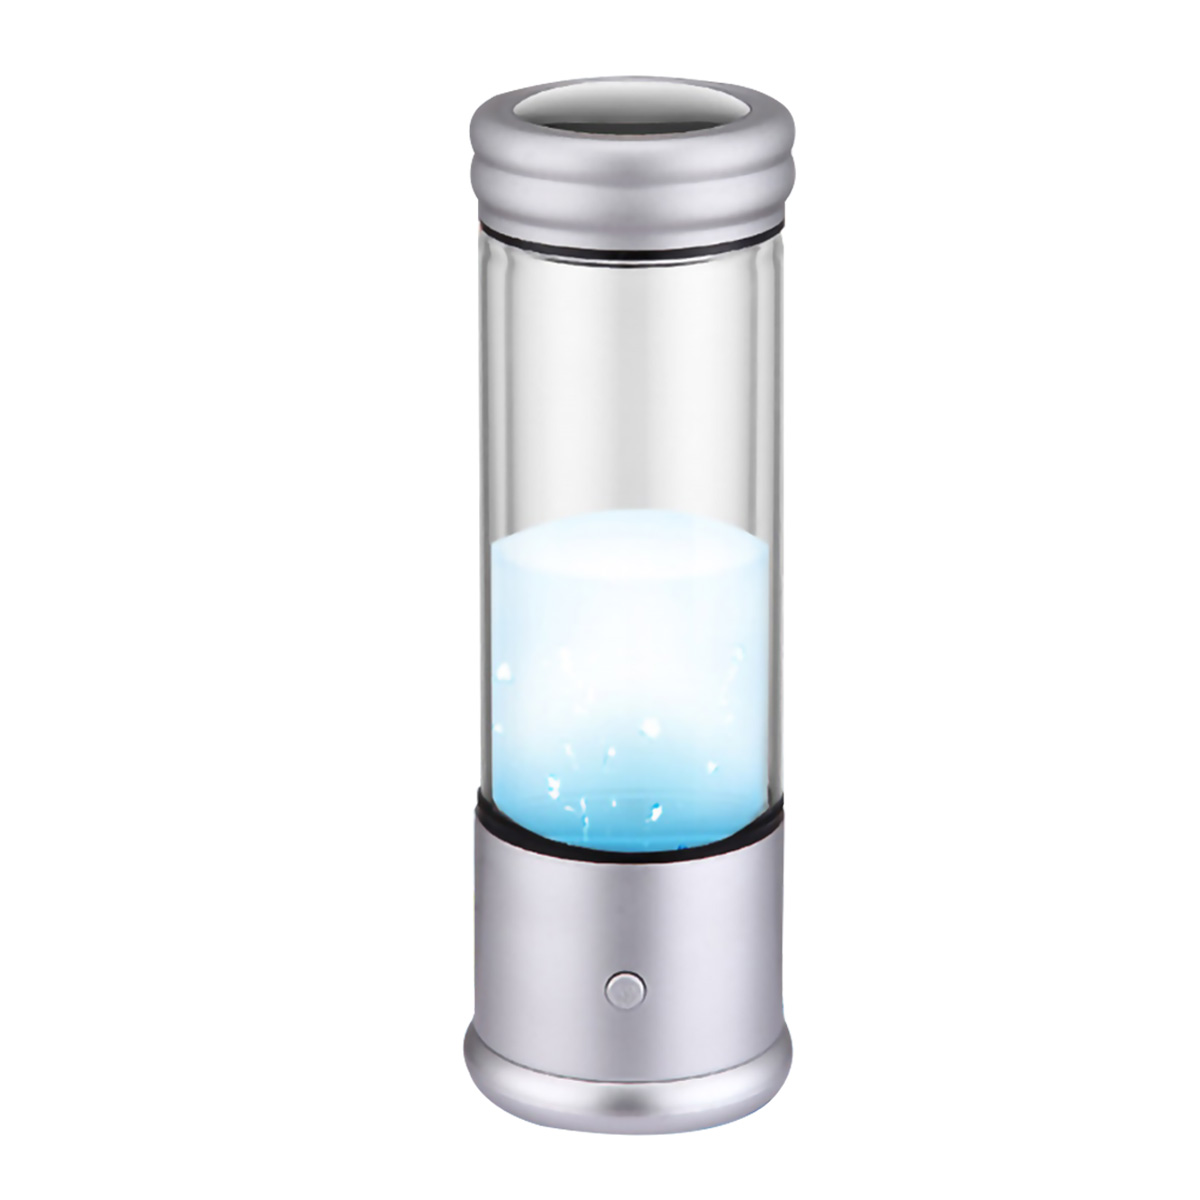 

AUGIENB USB Rechargeable Hy-drogen-rich Water Bottle Micro-electrolysis Negative Ion Water Cup High-concentration Small Molecule